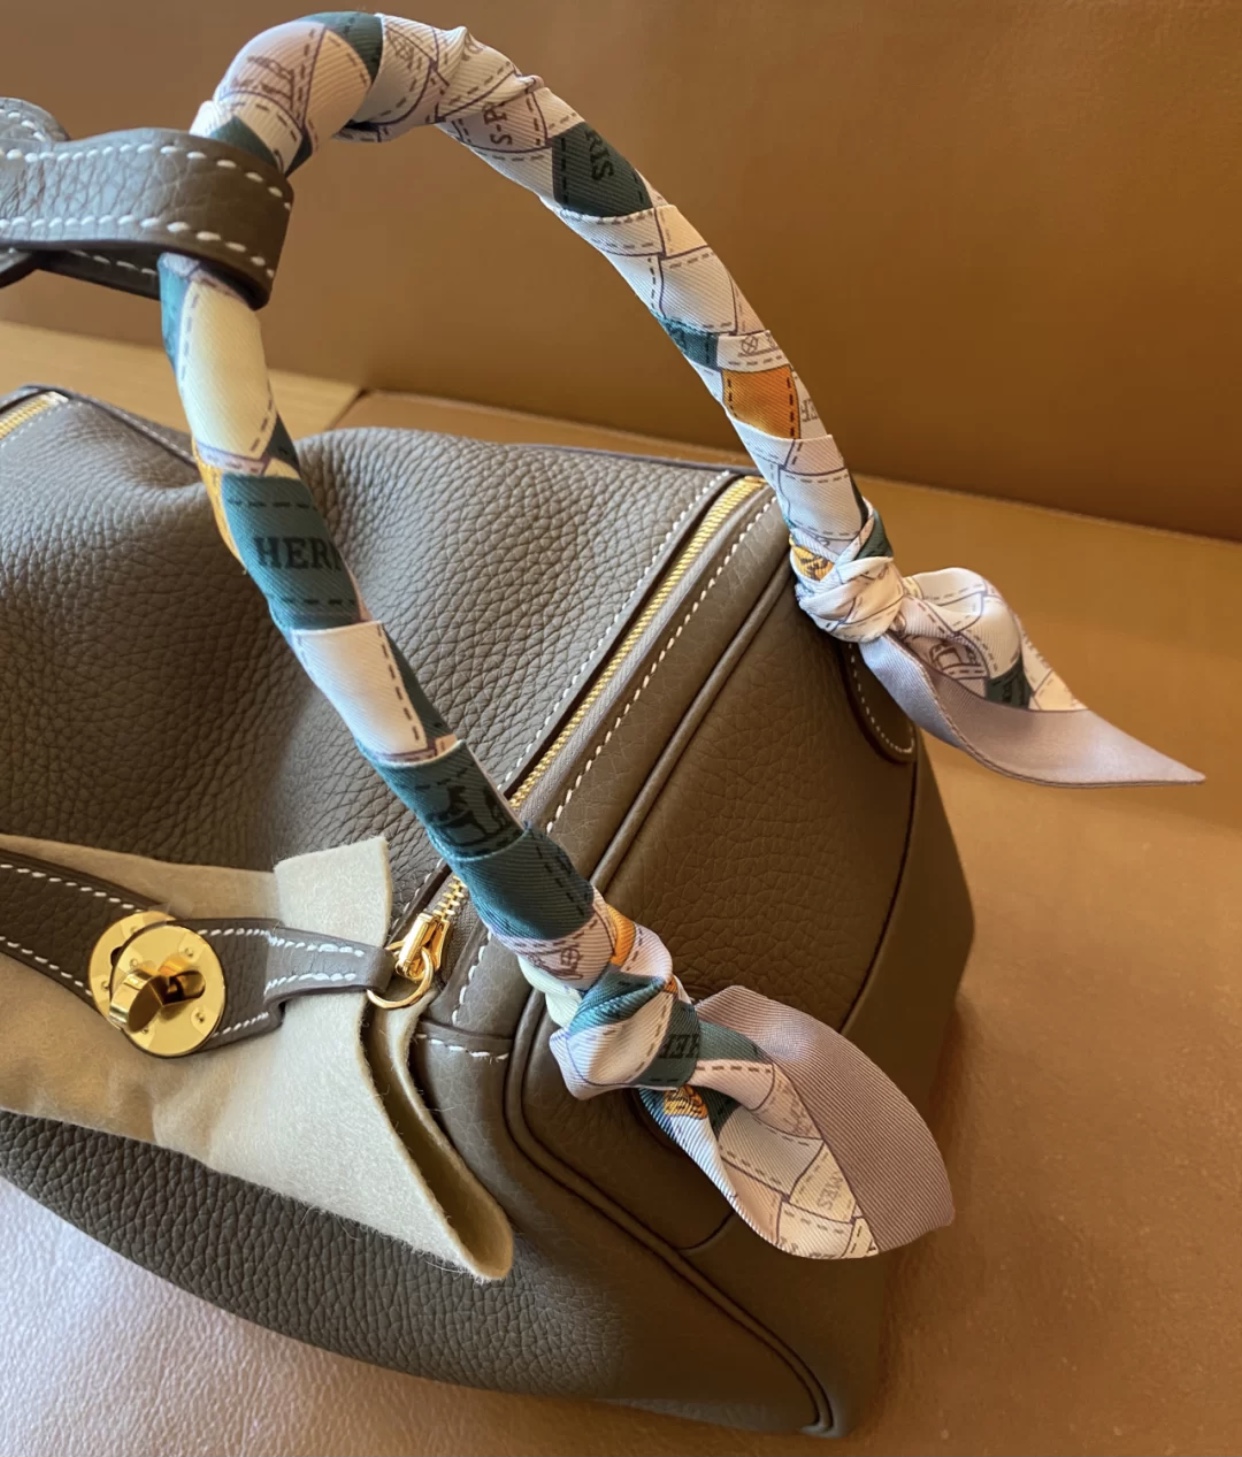 Hermes Lindy 26cm taurillon Clemence leather CC18 Etoupe 最熱賣的顏色